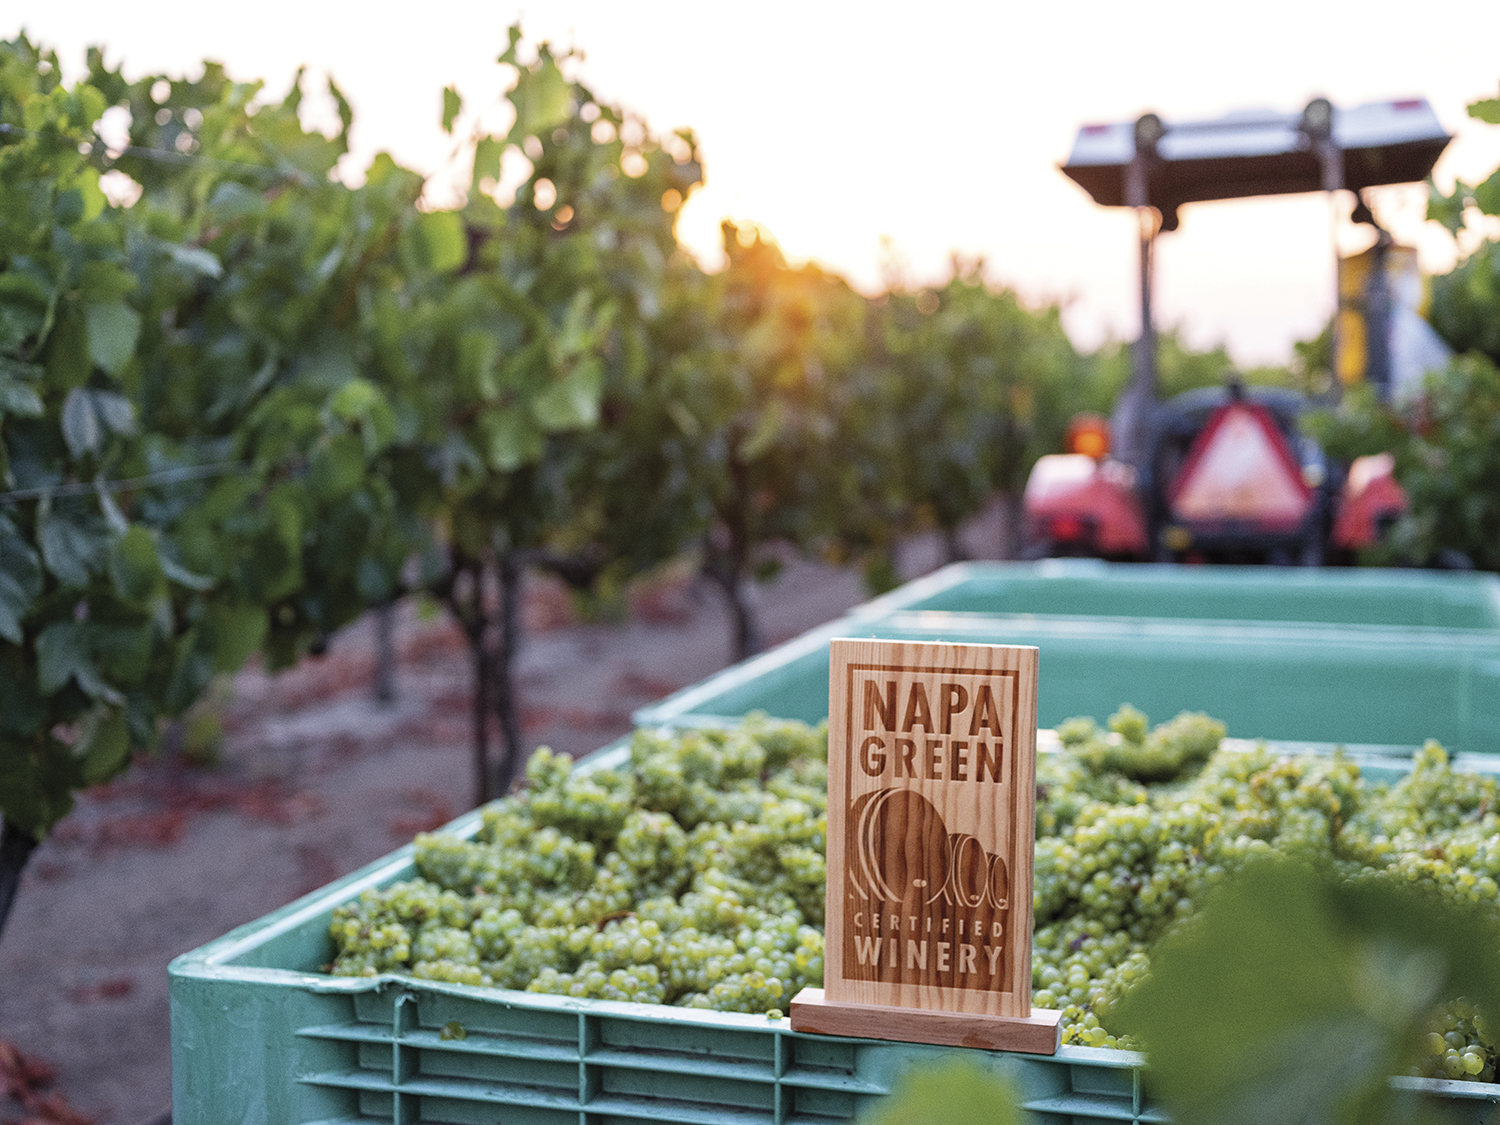 Napa Green: Leading the Movement Towards a More Sustainable Wine Industry